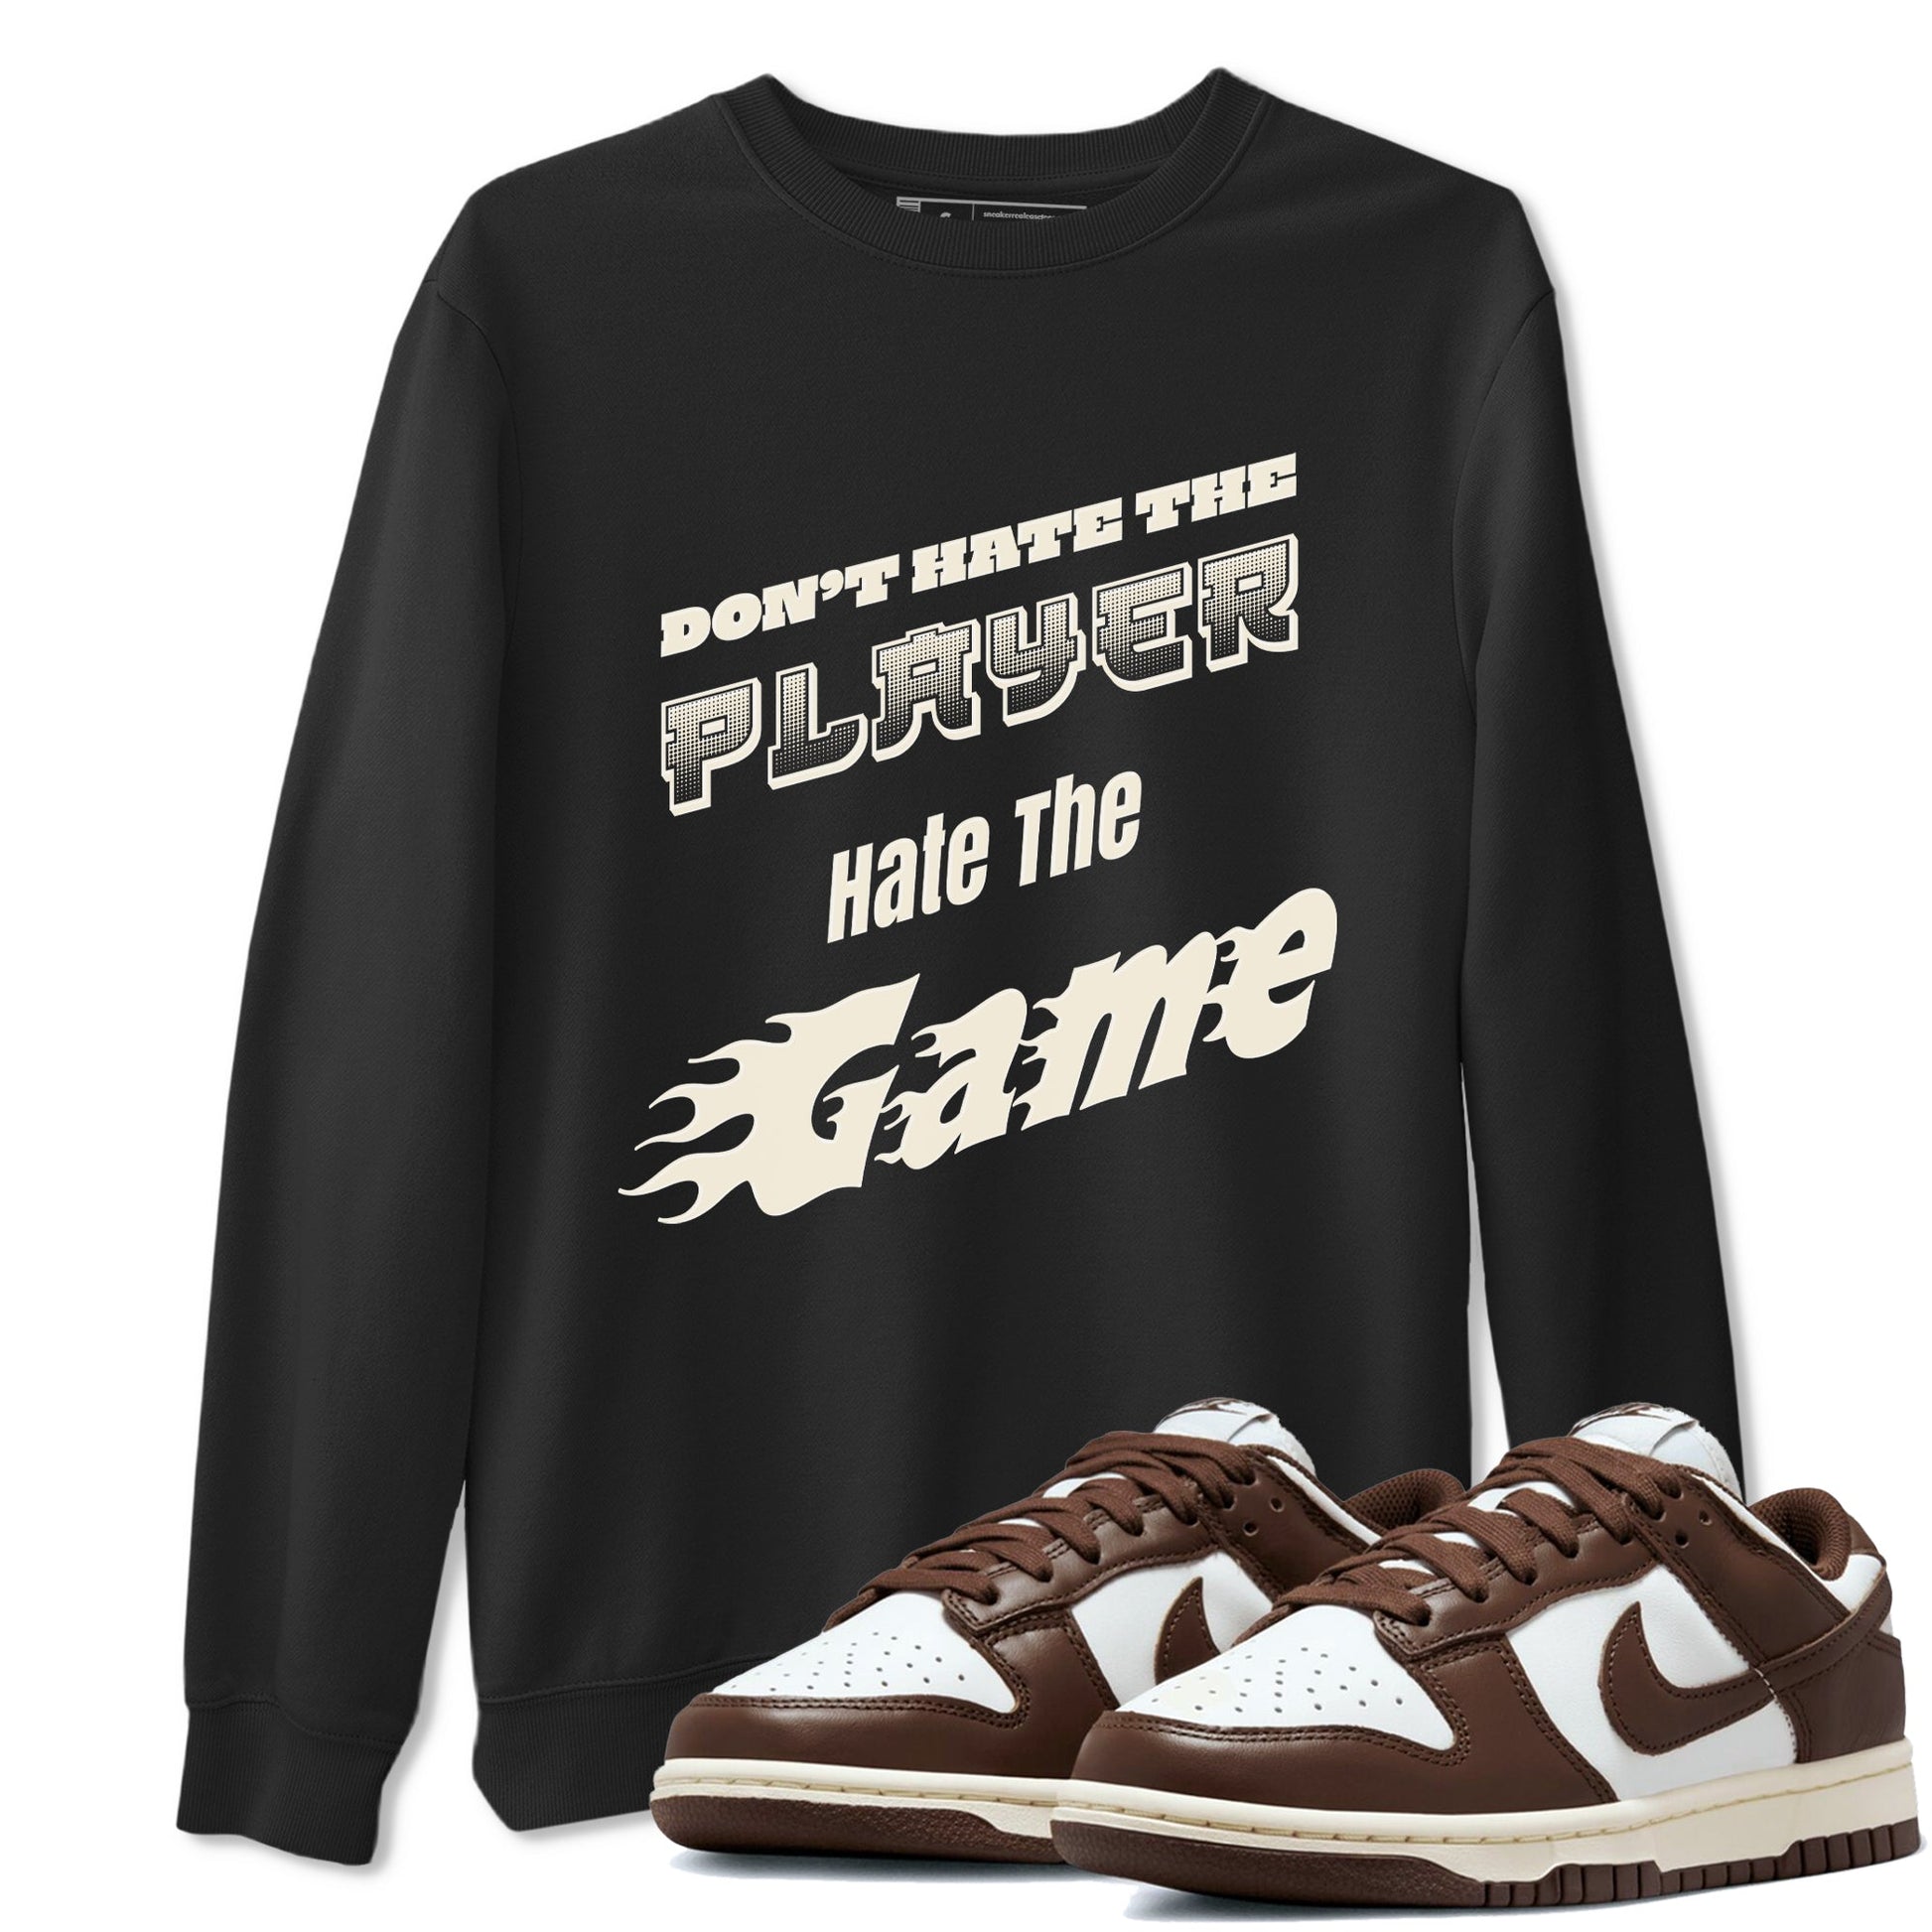 Dunk Cacao Wow shirt to match jordans Don't Hate The Player sneaker tees Dunk Cacao Wow SNRT Sneaker Release Tees Unisex Black 1 T-Shirt